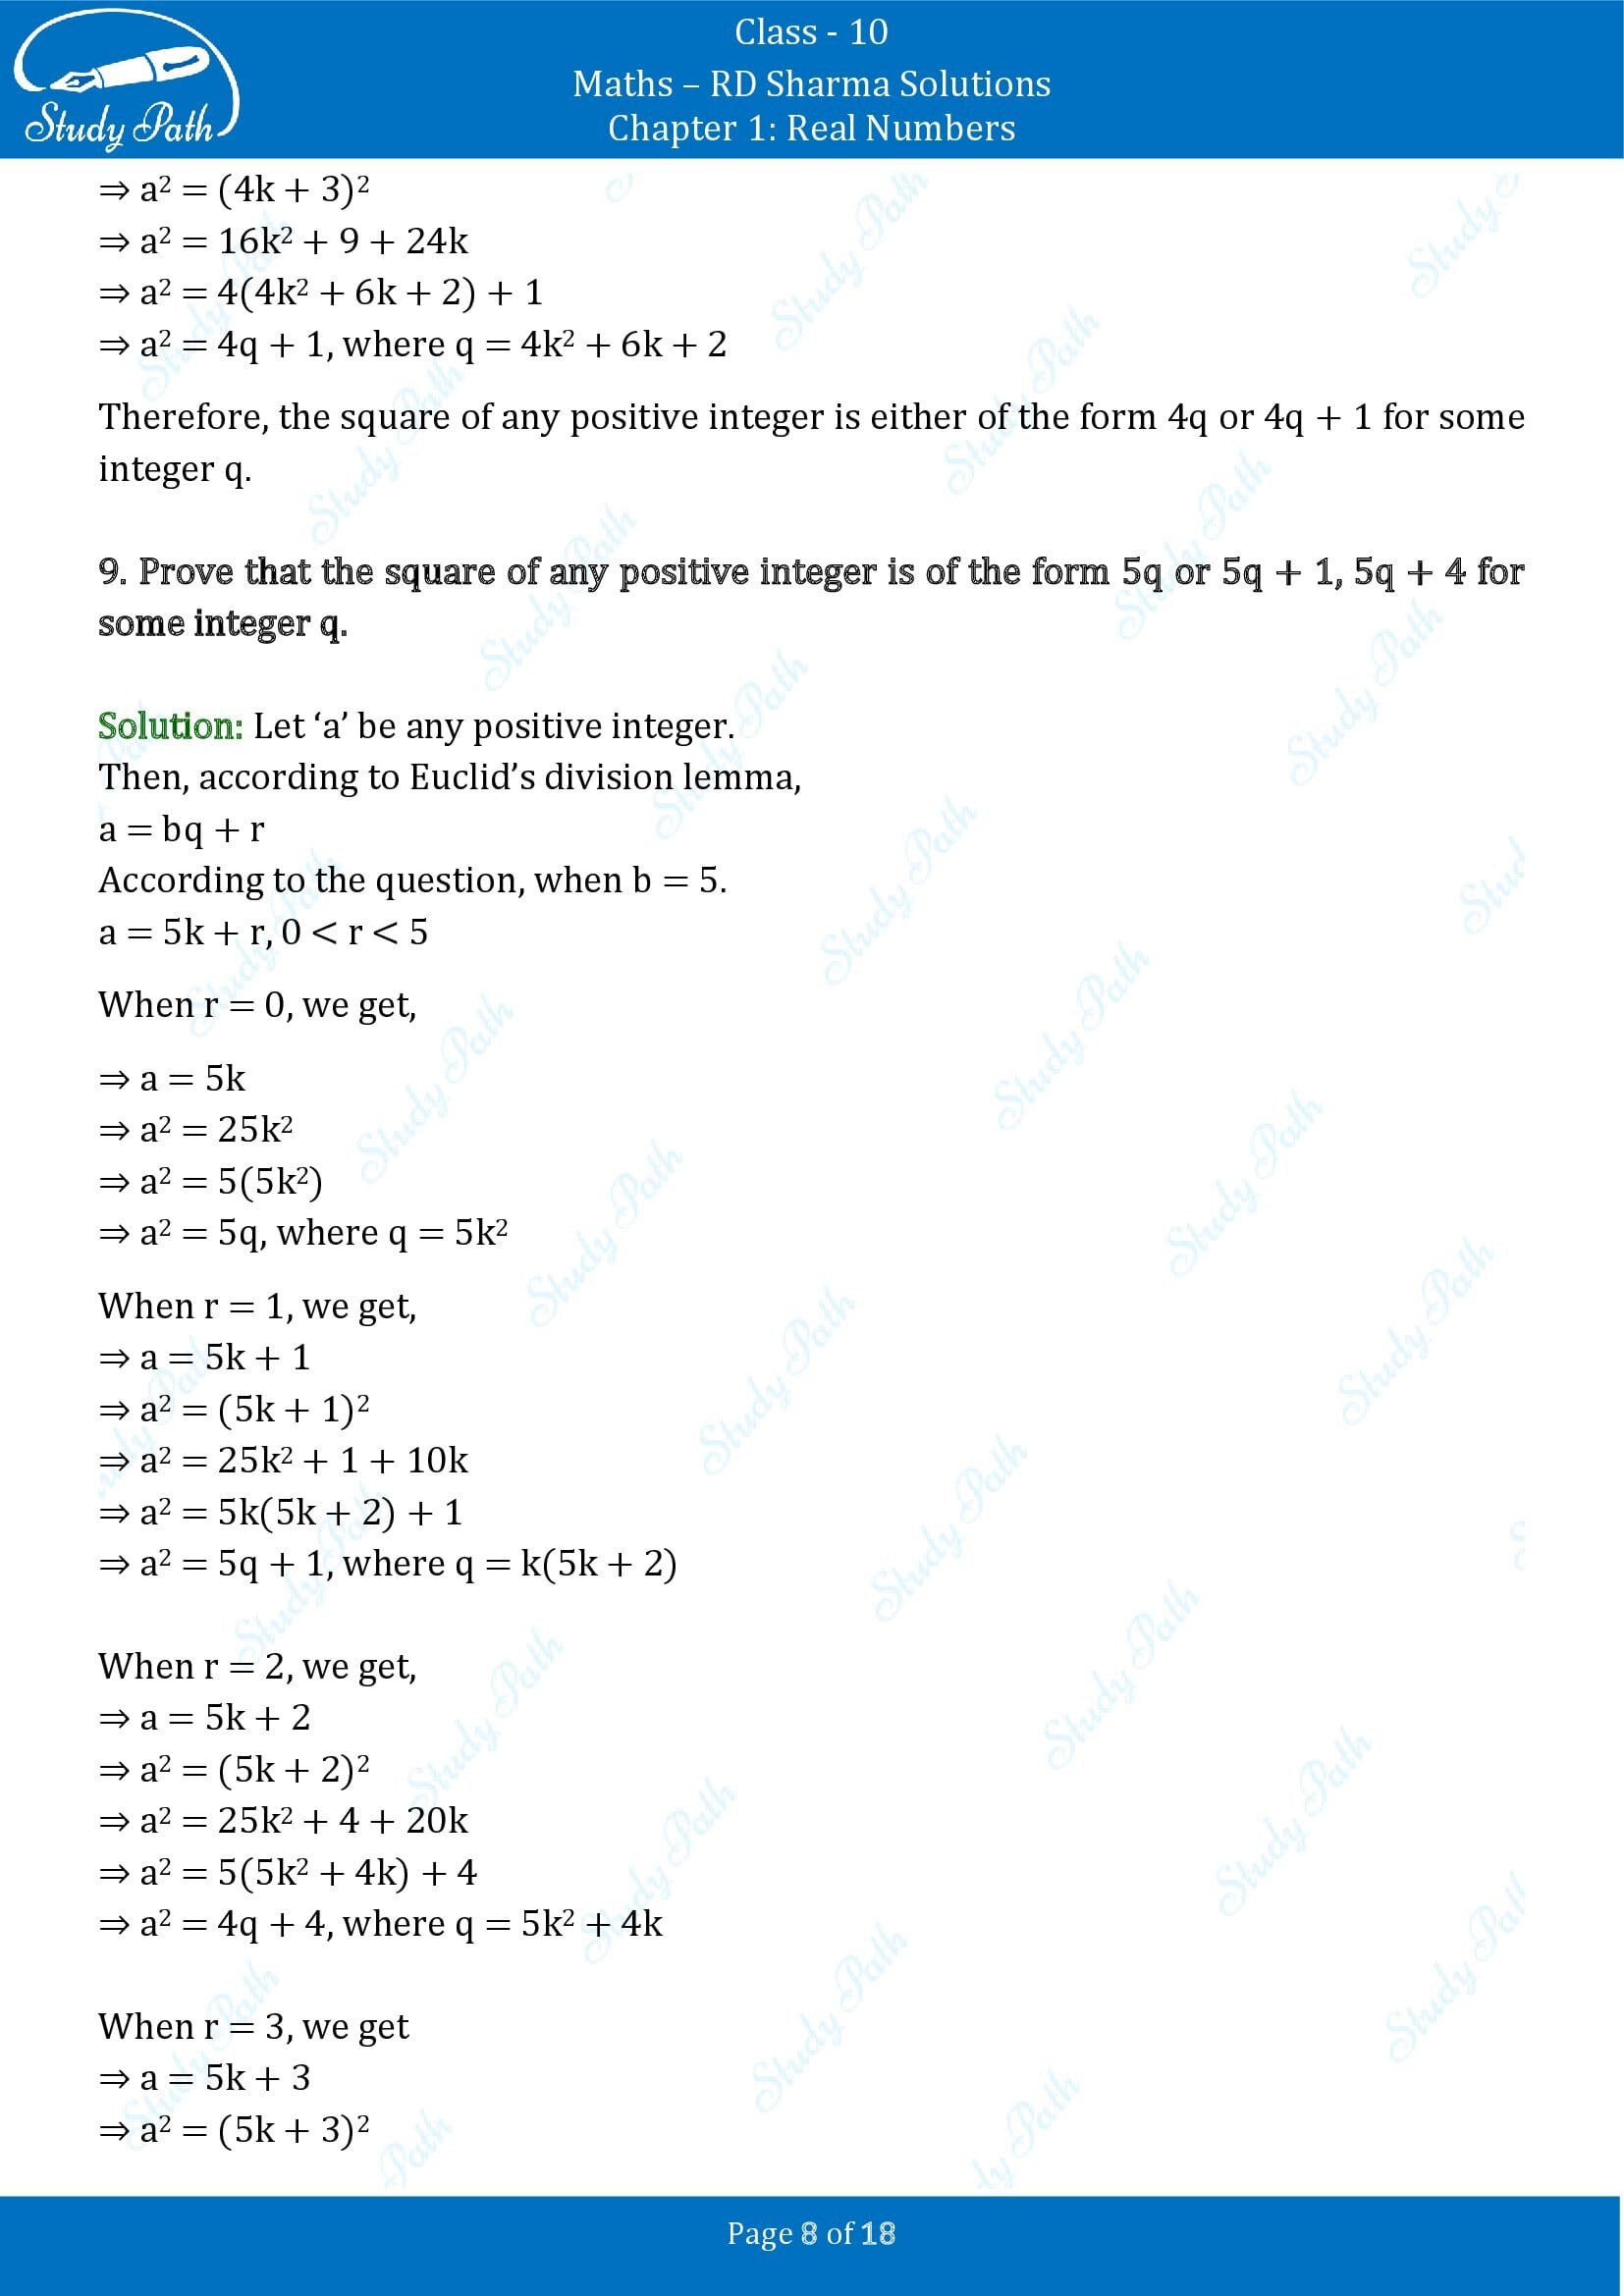 RD Sharma Solutions Class 10 Chapter 1 Real Numbers Exercise 1.1 00008